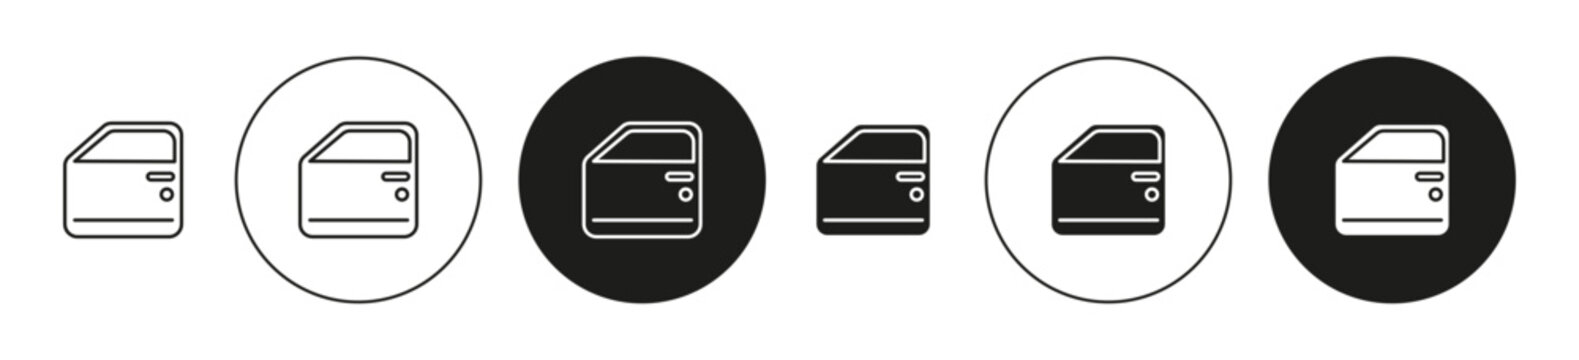 car door flat line icon collection. car door set in black and white color vector